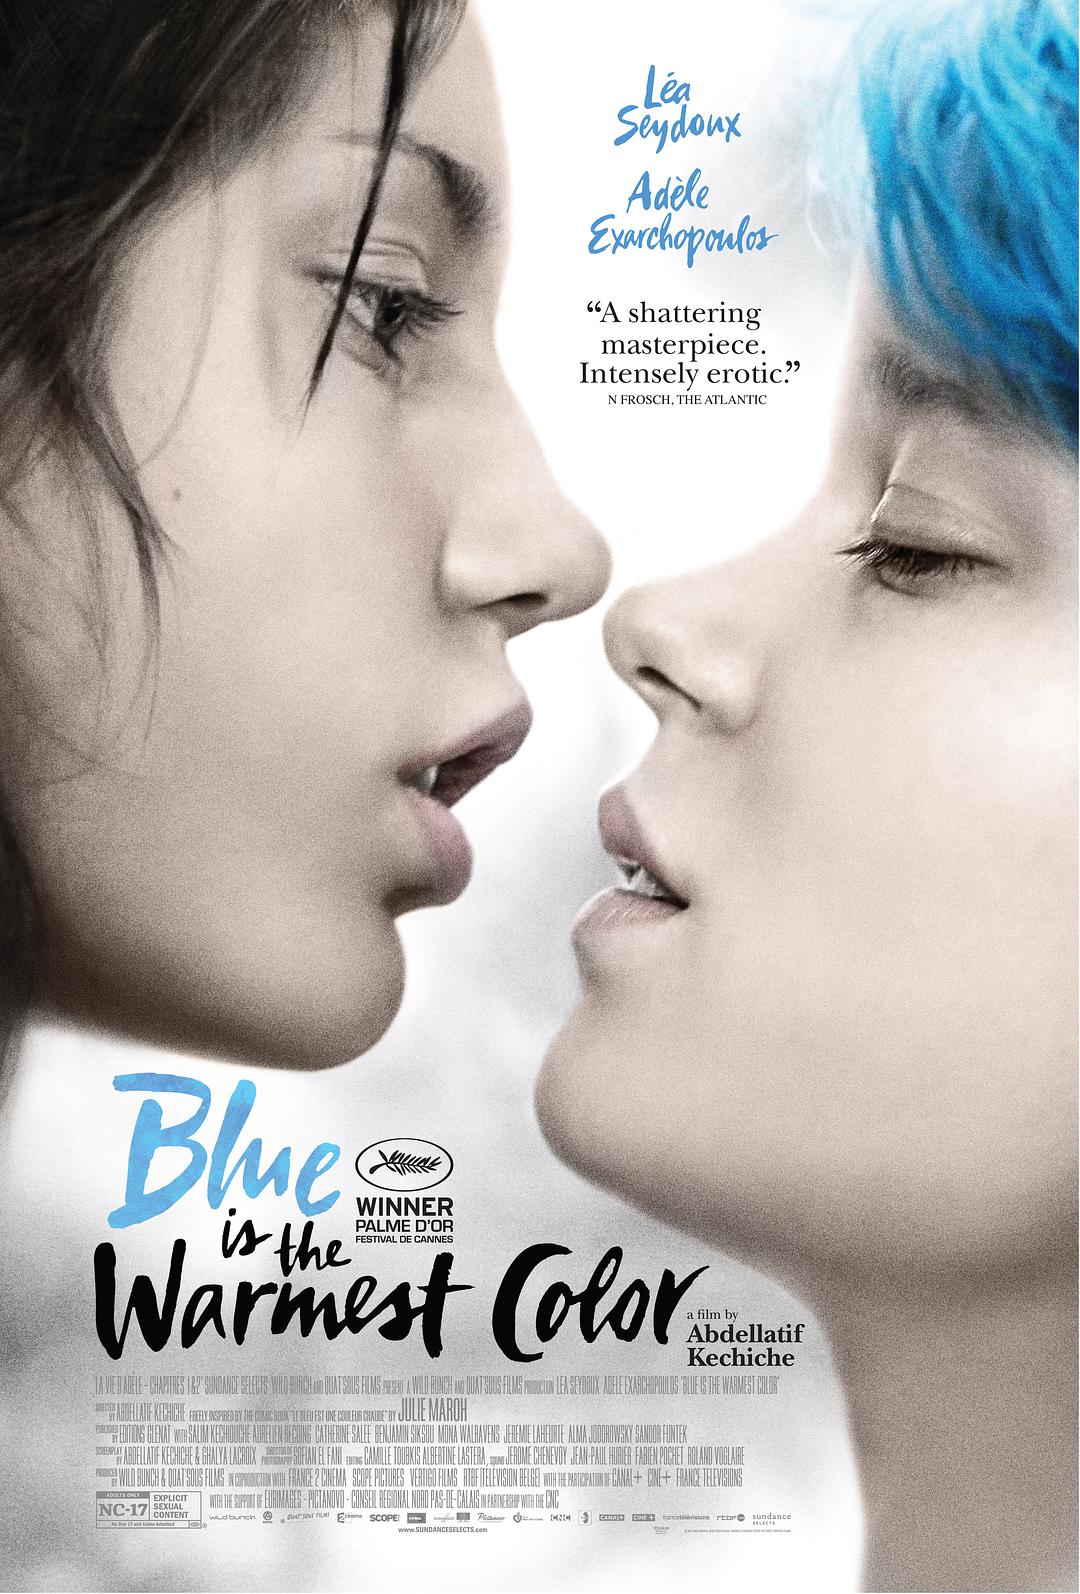  Blue.Is.the.Warmest.Color.2013.1080p.BluRay.x264-PSYCHD 12.03GB-1.png